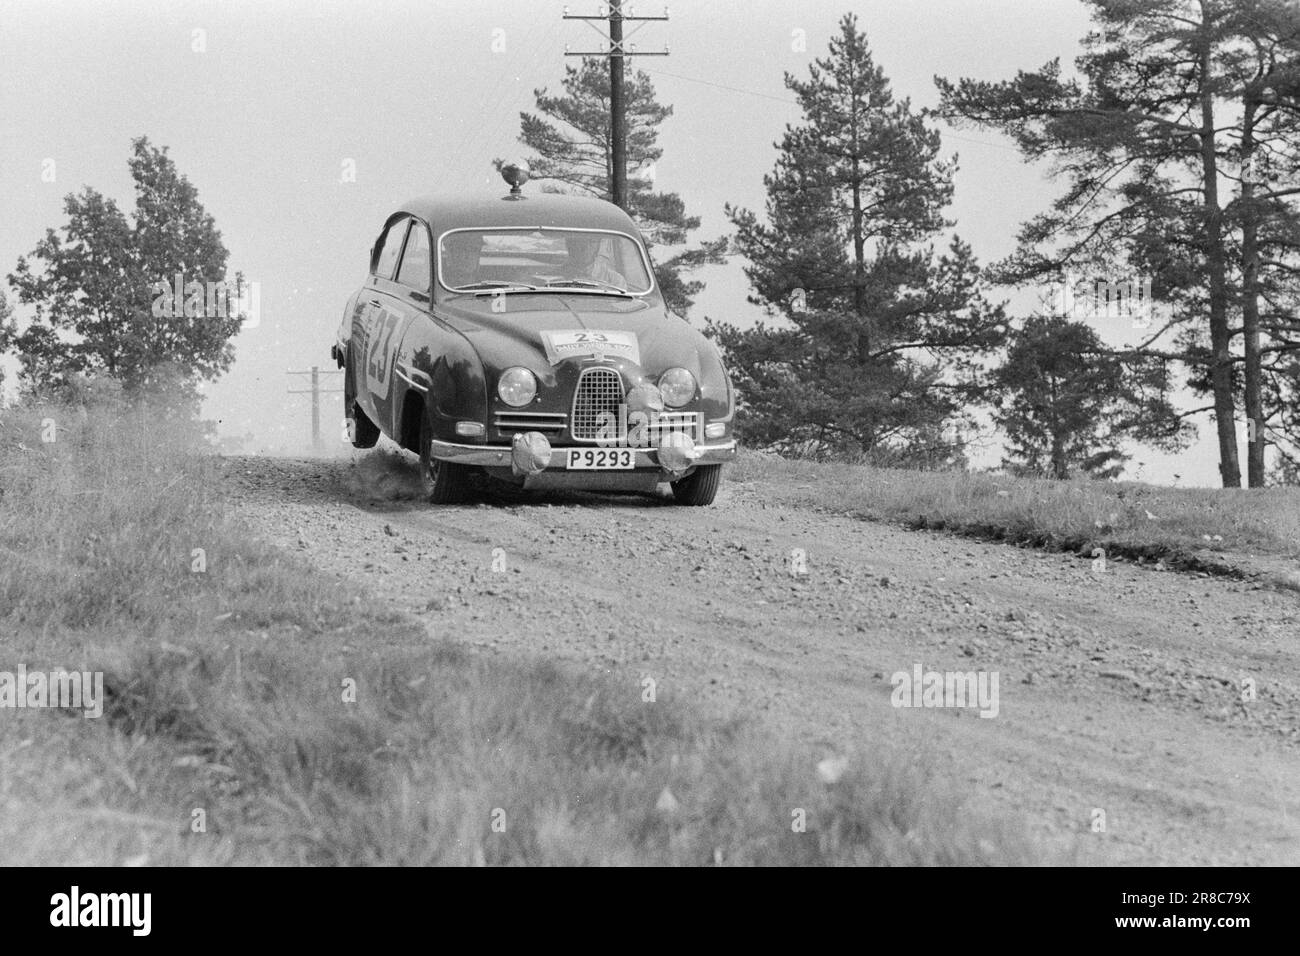 Actual 42-3-1960: Speed fever in sharp curves For 42 hours, we followed the participants in this year's Rally Viking as they drove the 1,850 kilometer long course criss-crossing southern Norway, it was hours of drama, excitement - and speed fever.  A small bump in the road throws the car into the air, but the two in the car don't notice. At a hundred kilometers an hour, they are approaching a sharp curve on the narrow rural road. The gravel drums furiously against the bodywork. The basket meets them. The two men hold their breath. The driver turns the steering wheel hard. For a few tenths of a Stock Photo